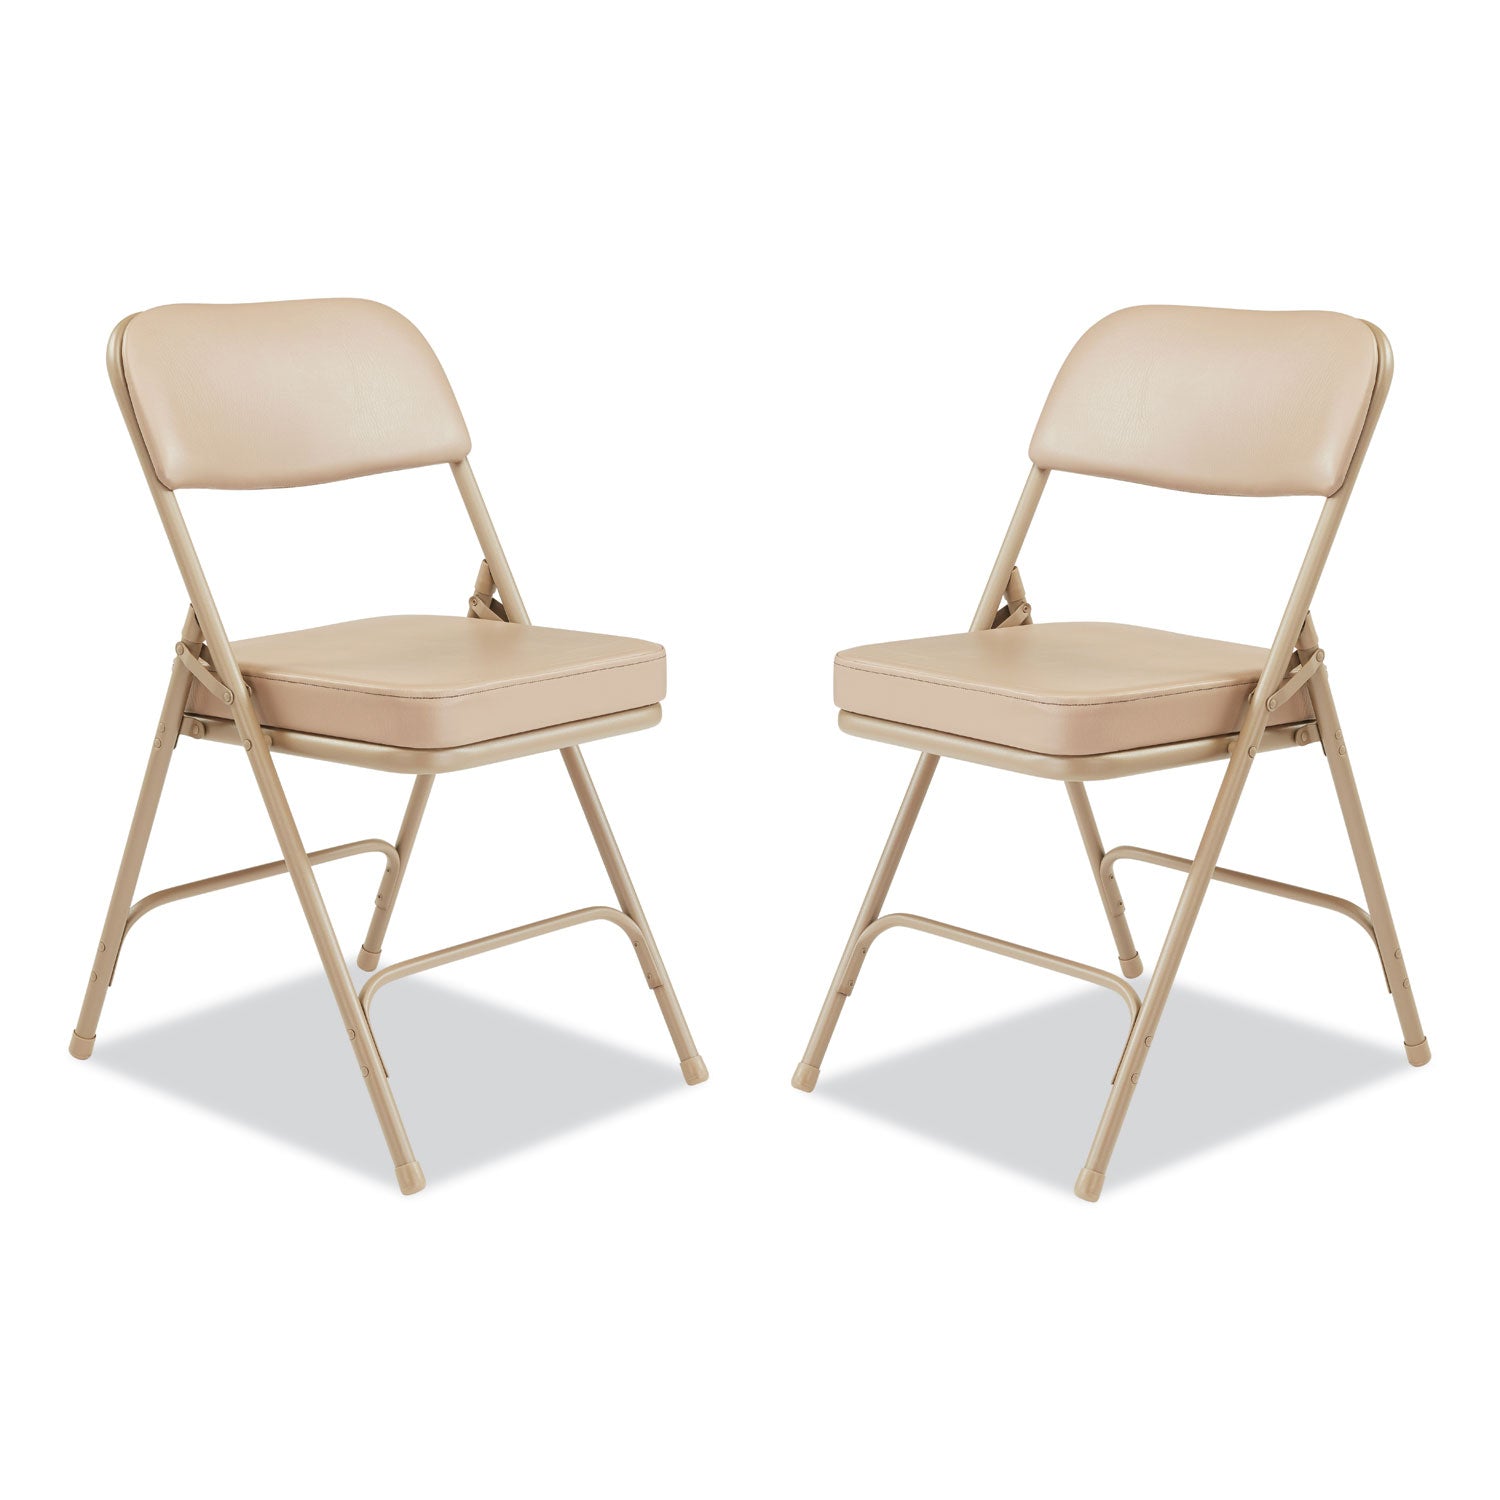 3200-series-2-vinyl-upholstered-double-hinge-folding-chair-supports-300lb-185-seat-ht-beige-2-ctships-in-1-3-bus-days_nps3201 - 1